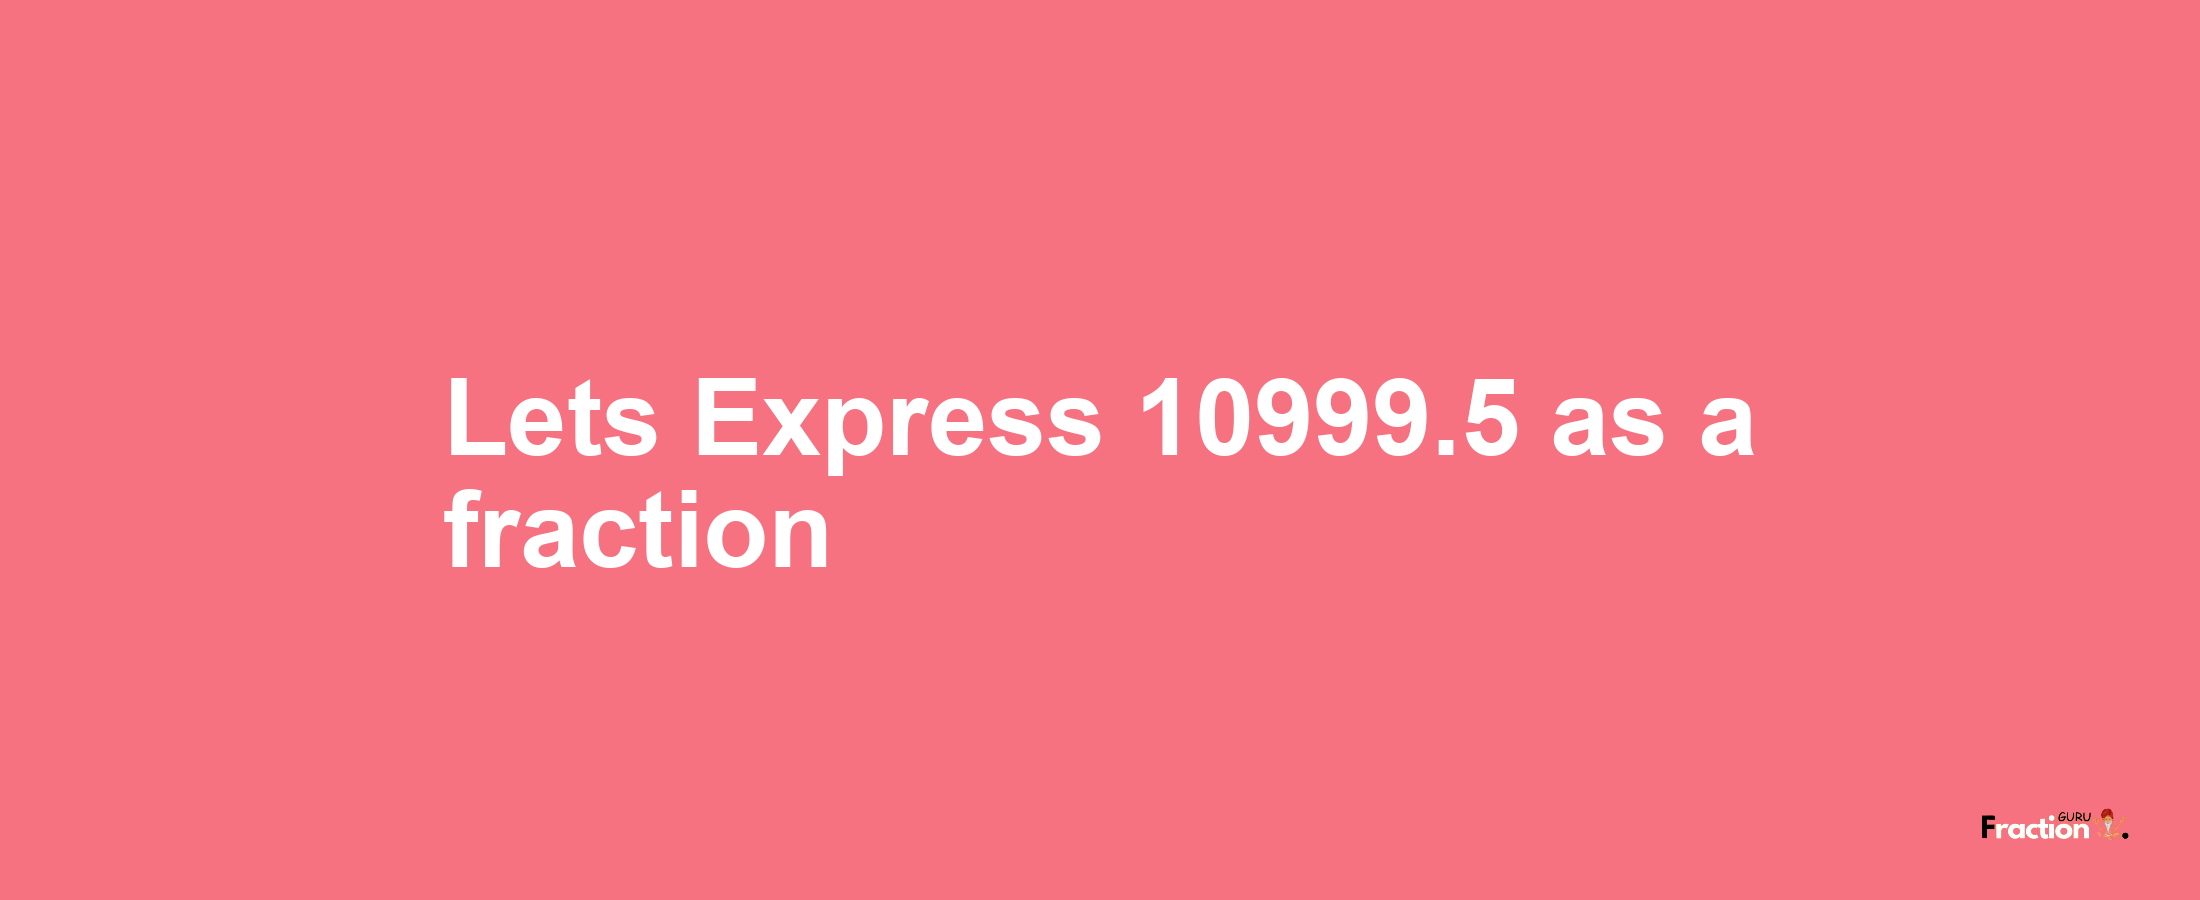 Lets Express 10999.5 as afraction